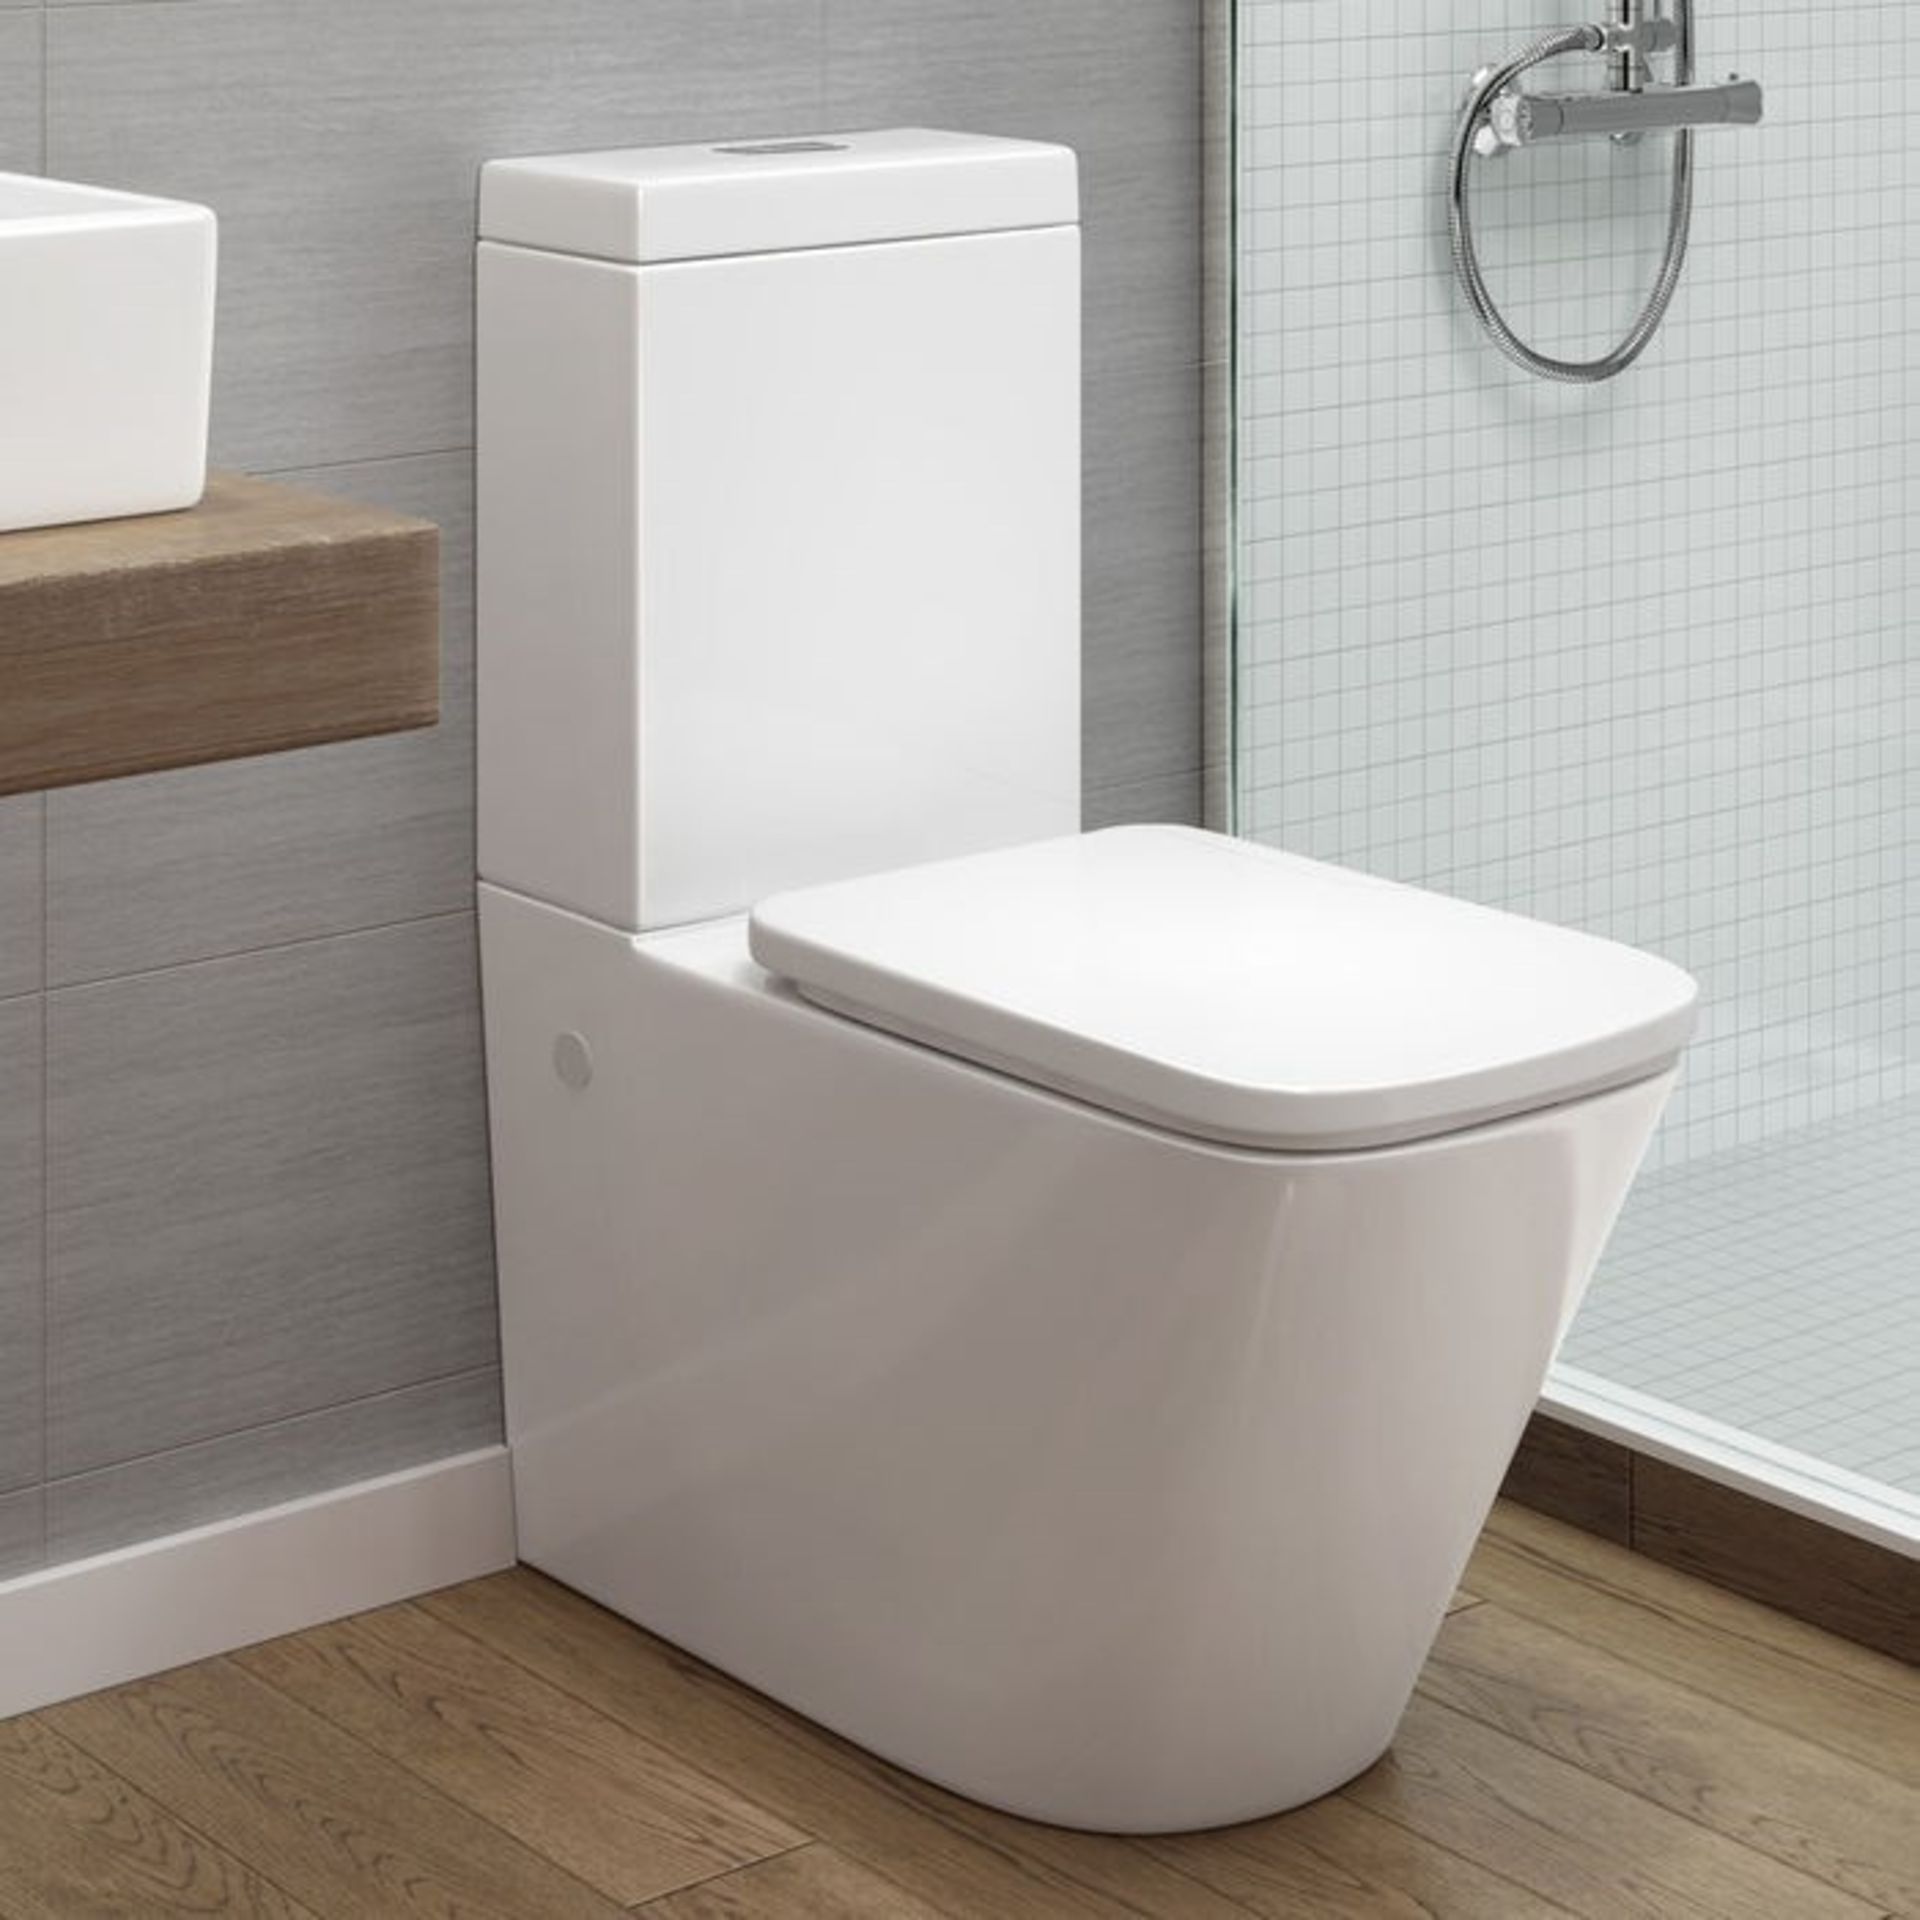 Florence Close Coupled Toilet & Cistern inc Soft Close Seat. Contemporary design finished...